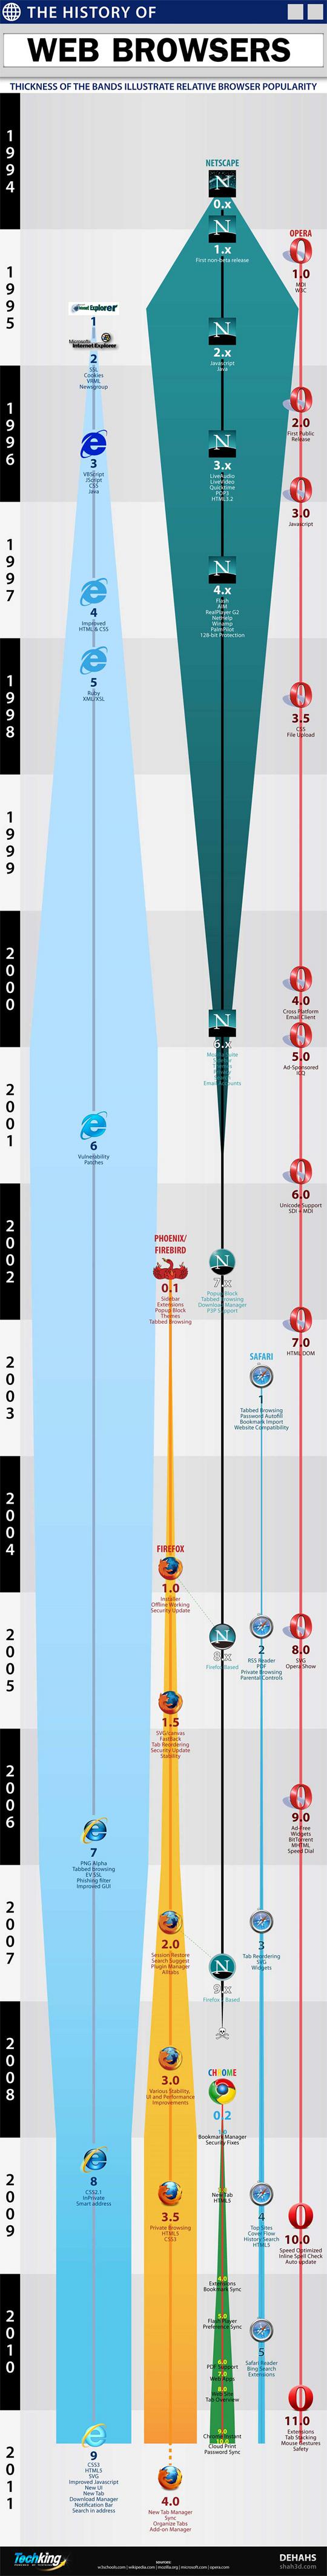 the history of web browsers infographic